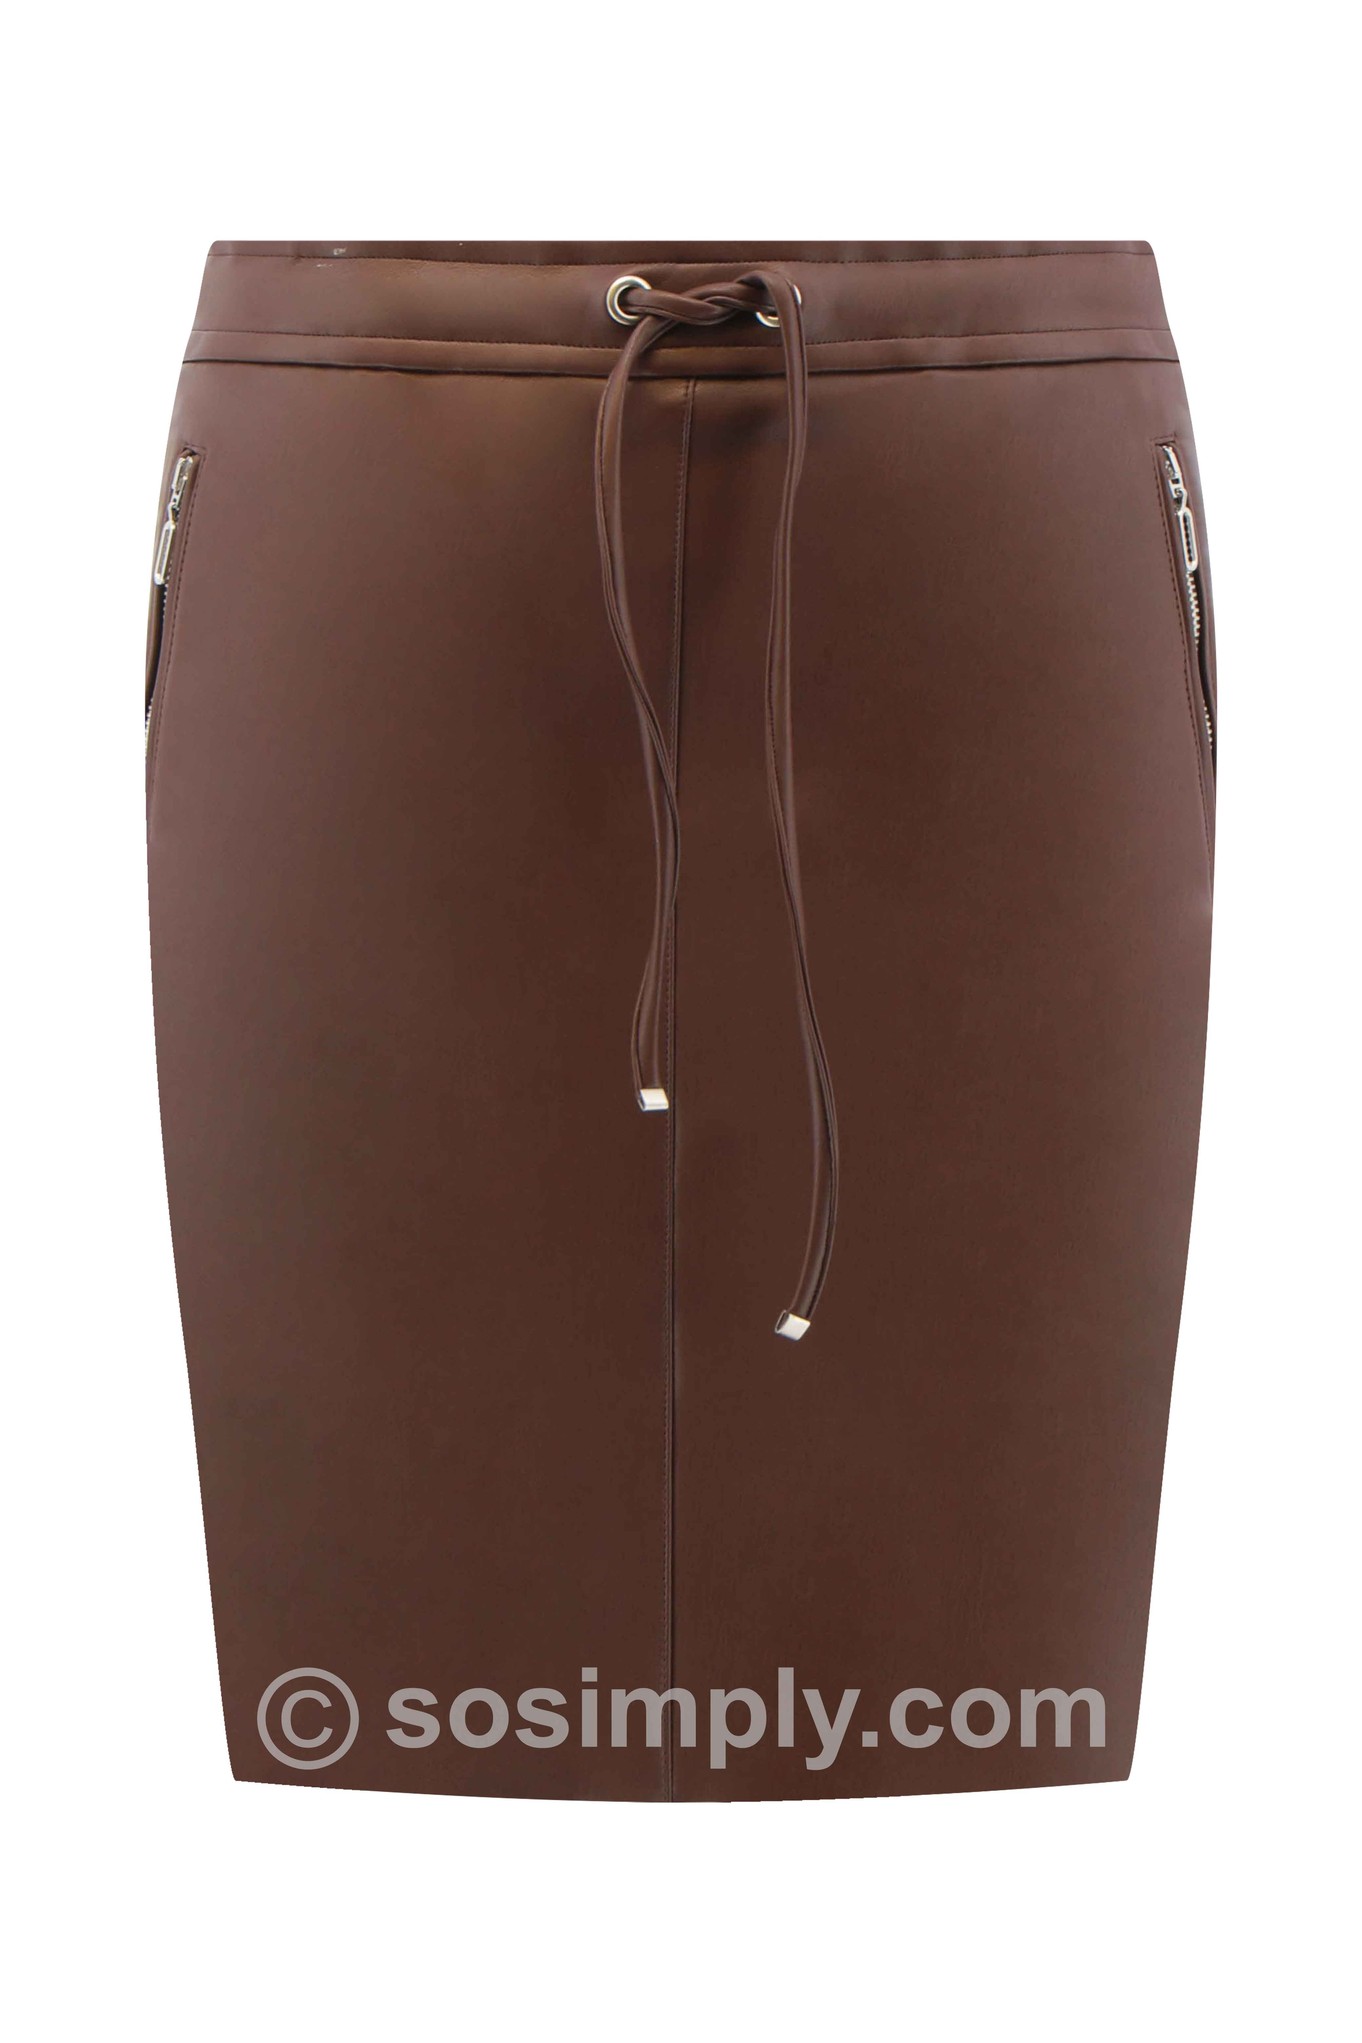 R.O.B. by Robell Jutta Faux Leather Skirt